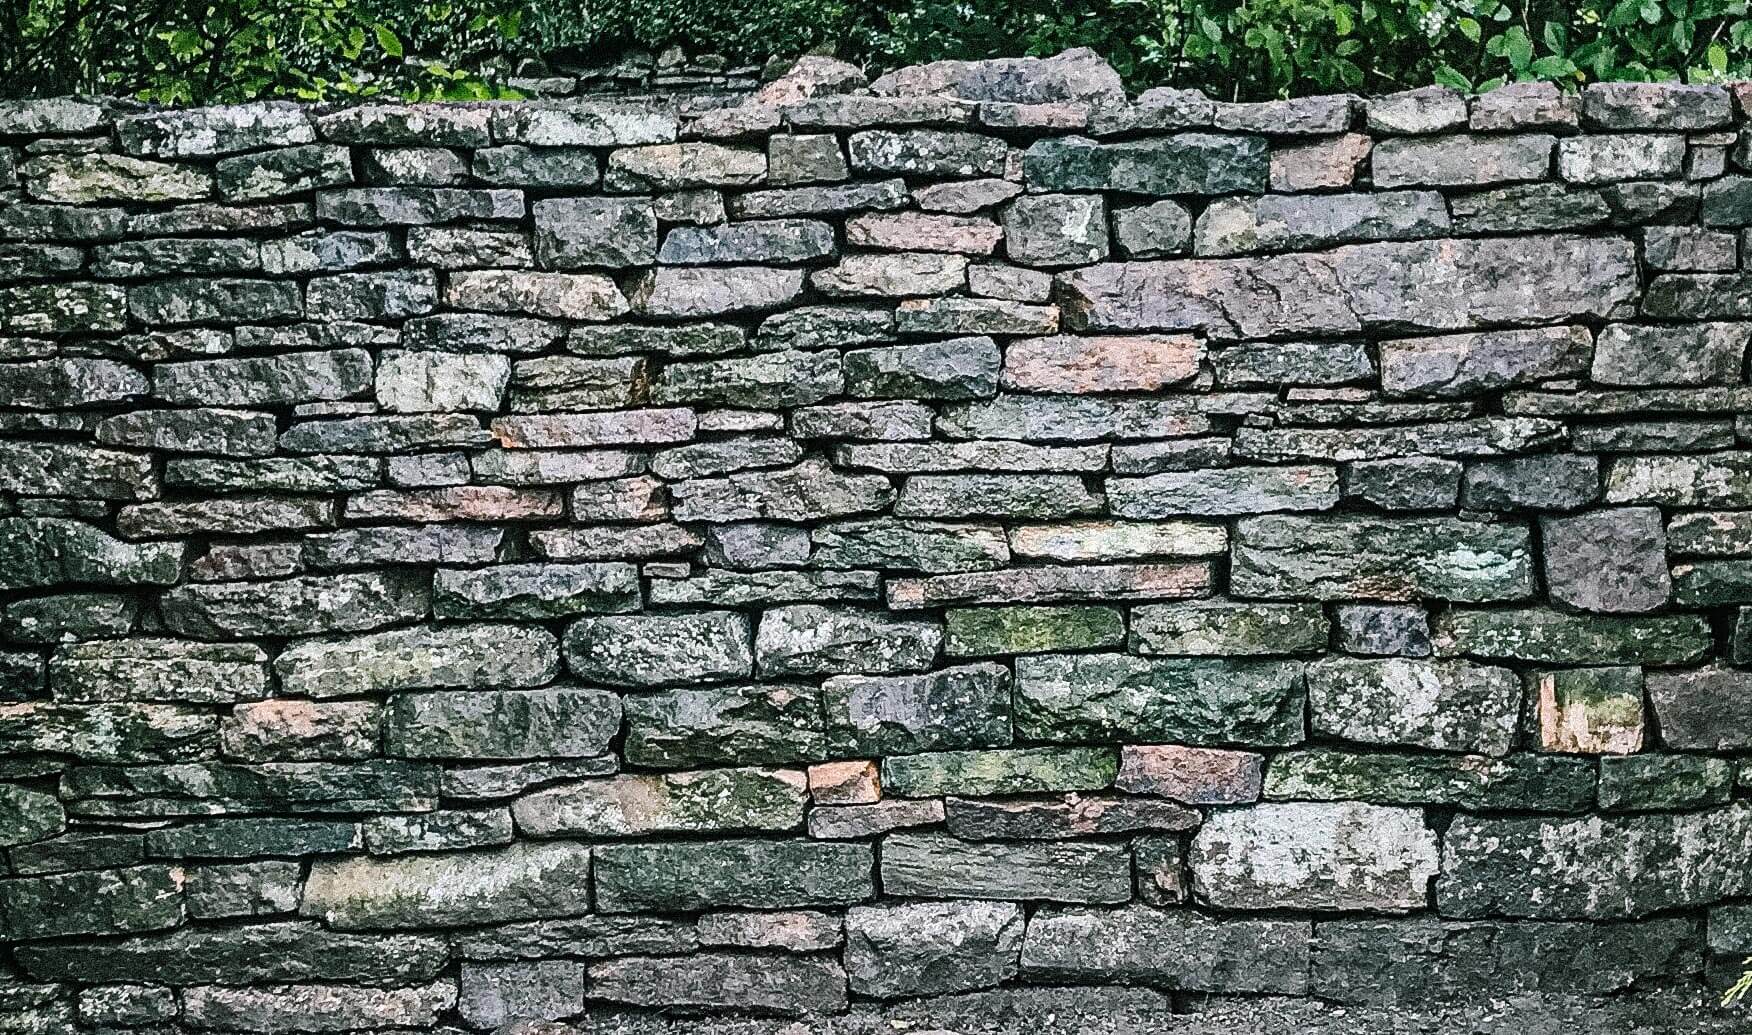 Dry stone walling - A close up photo of a grit stone dry stone wall in Sheffield